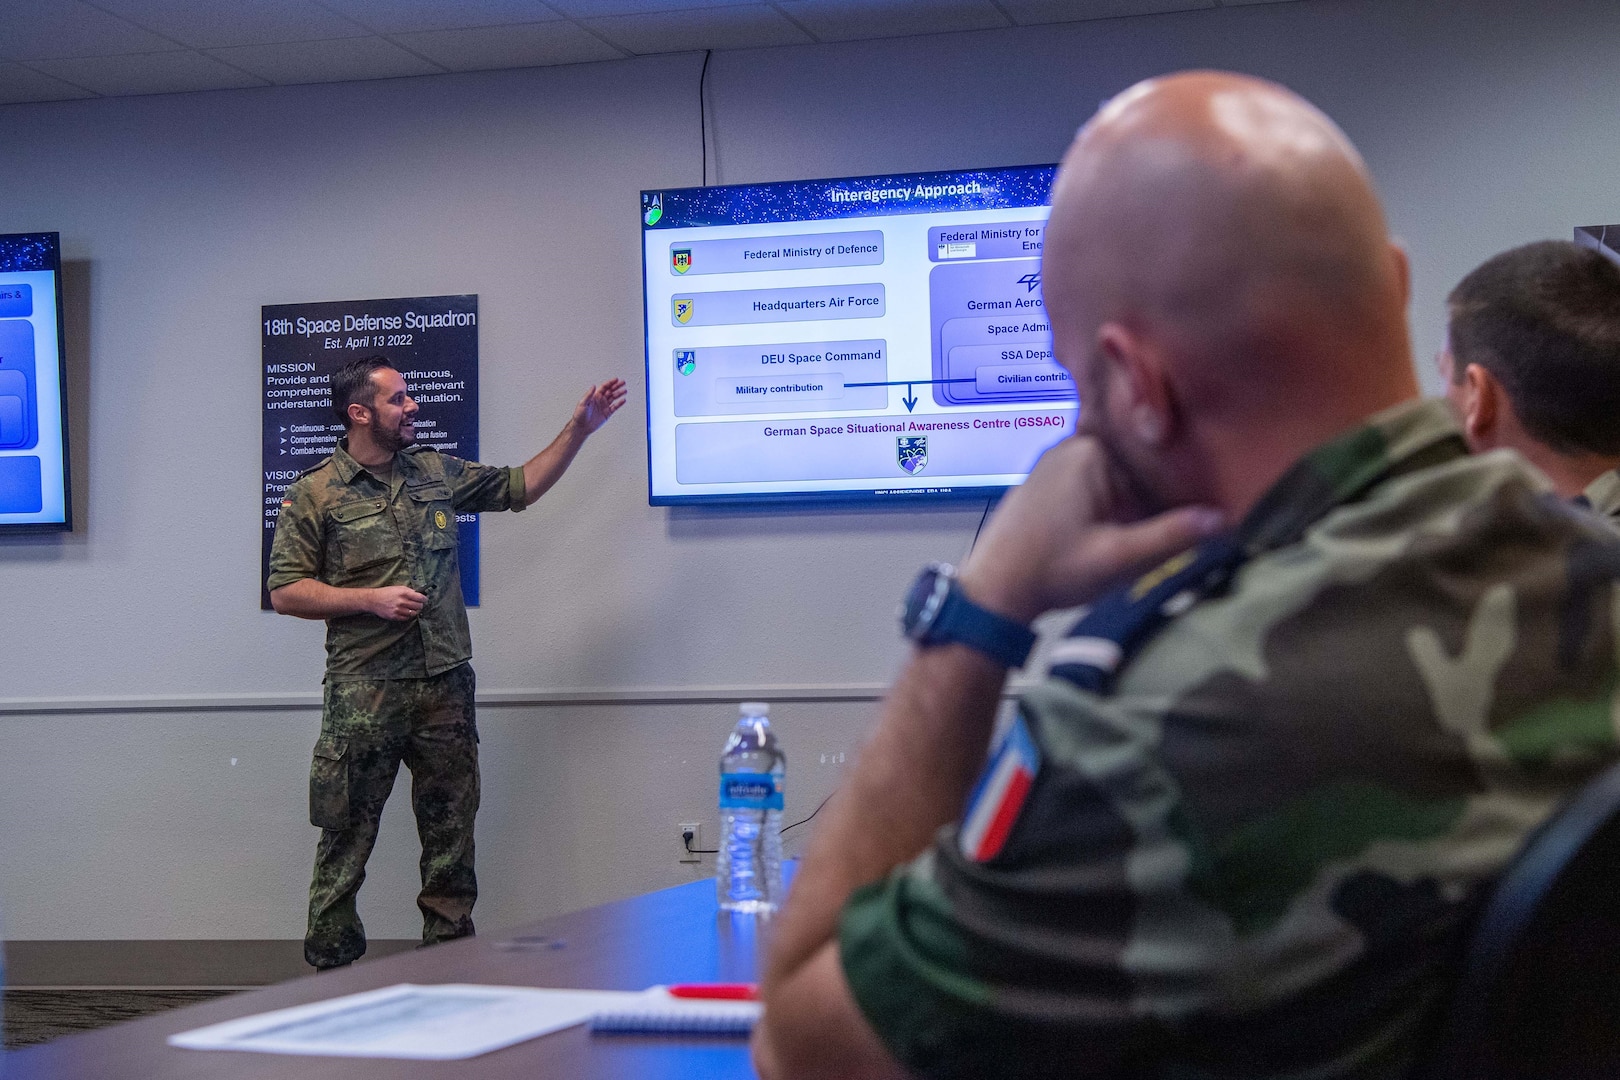 Germany Air Force Capt. Dennis Hall, German Space Situational Awareness Centre space operator, briefs members of the 18th Space Defense Squadron and the Operational Center for Military Surveillance of Space Objects during the first day of the Operator Exchange program at Vandenberg Space Force Base, Calif., July 10, 2023. The GSSAC is a civil-military facility that provides space situational awareness for the German government. It uses national and commercial capabilities to create a situational view of space. (U.S. Space Force photo by Julian Labit)